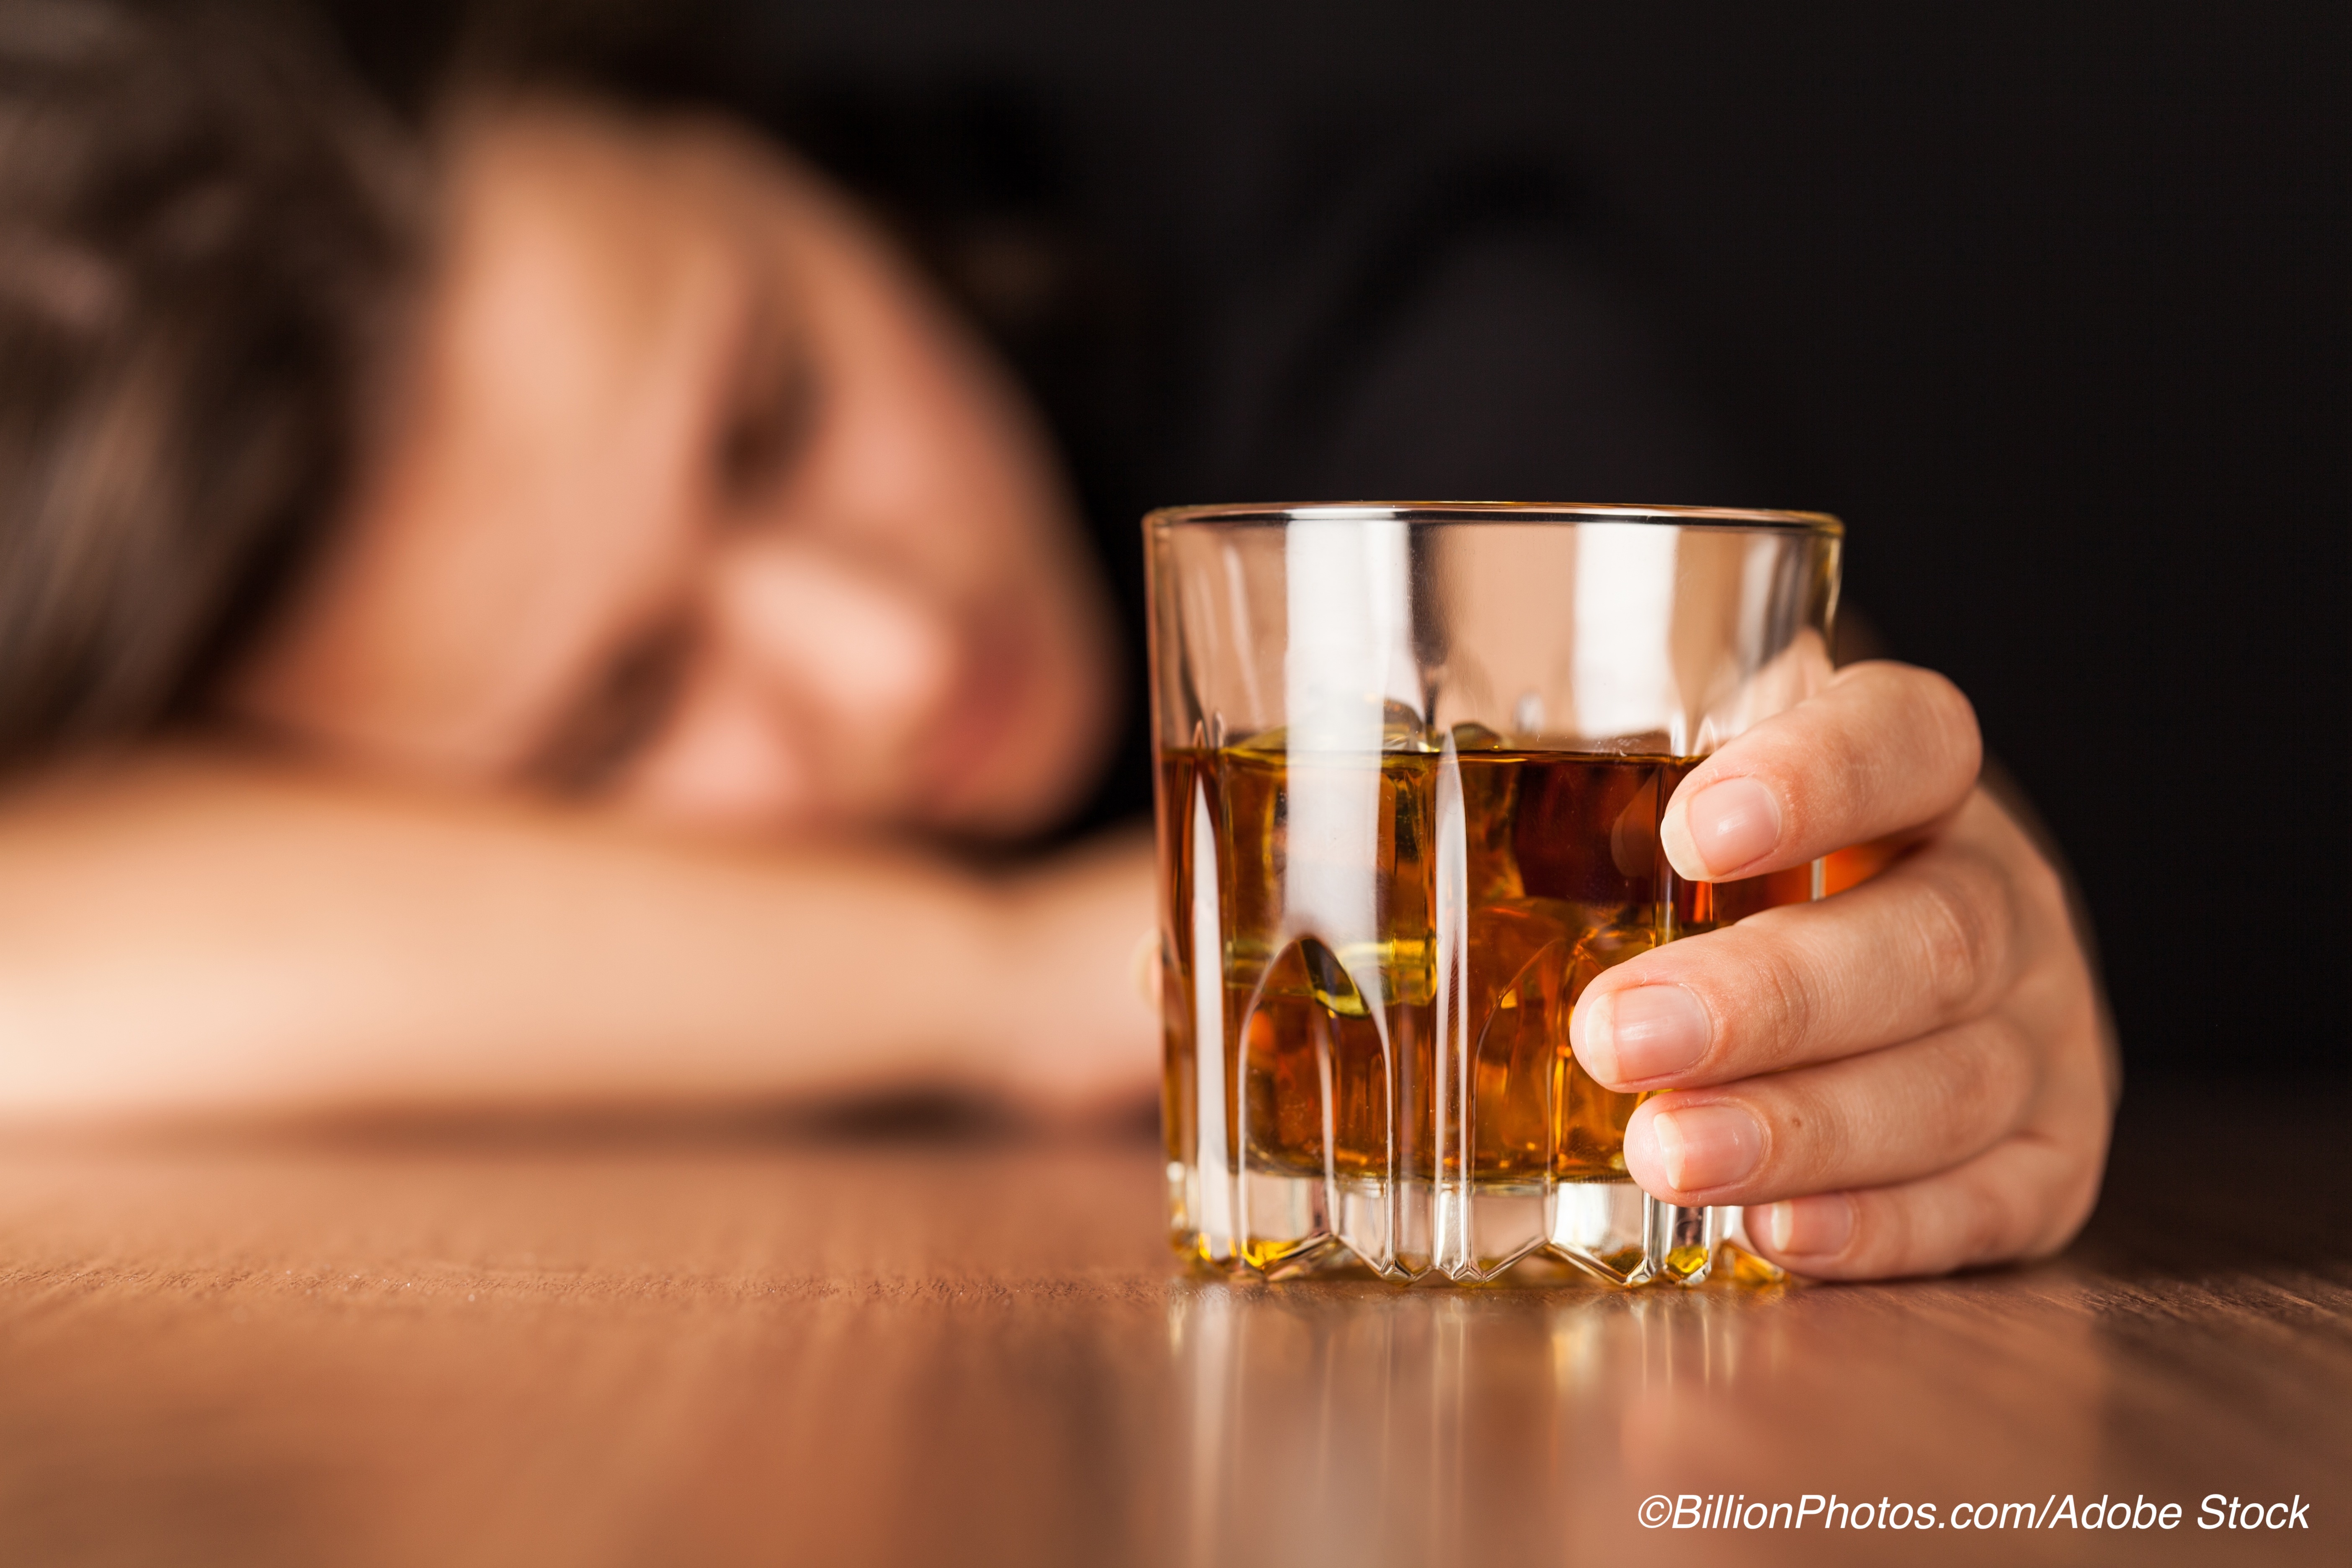 Alcohol Dependence: Primary Care Faces Dearth of Treatment Data